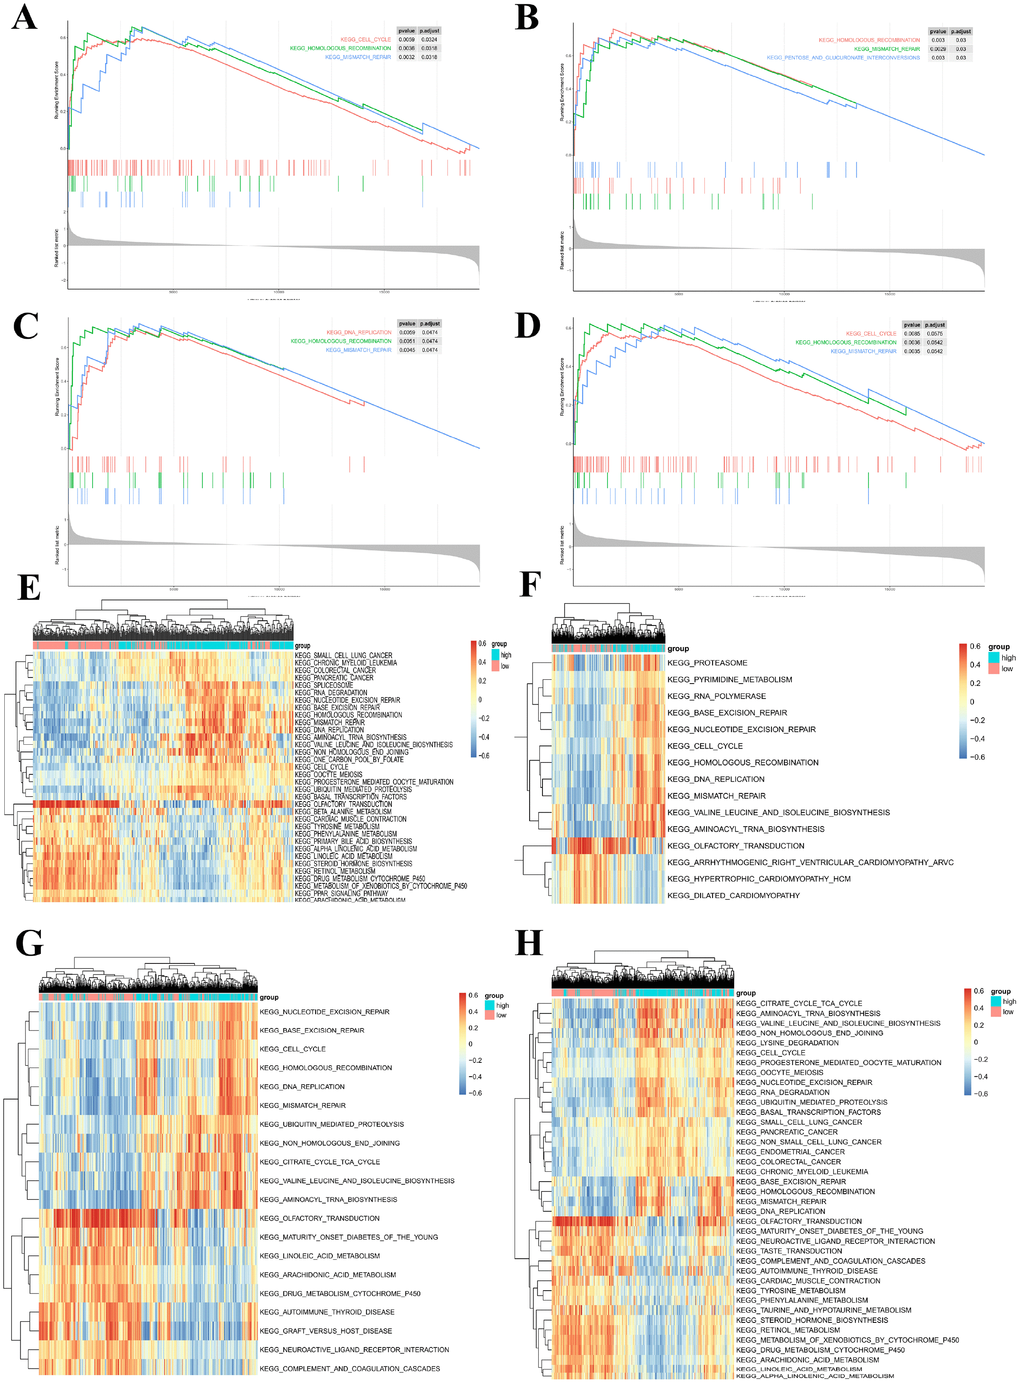 Gene set enrichment analysis (GSEA) and gene set variation analysis (GSVA) of hub genes in the TCGA-PRAD dataset. (A–D) Top 3 gene sets (according to GSEA enrichment score) enriched in the high-expression group of single hub genes. (A) LMNB1; (B) TK1; (C) ZWINT; (D) RACGAP1. (E–H) GSVA-derived clustering heatmaps of differentially expressed pathways for single hub genes. (E) LMNB1; (F) TK1; (G) ZWINT; (H) RACGAP1. Only signaling pathways with log(foldchange) > 0.2 are shown.